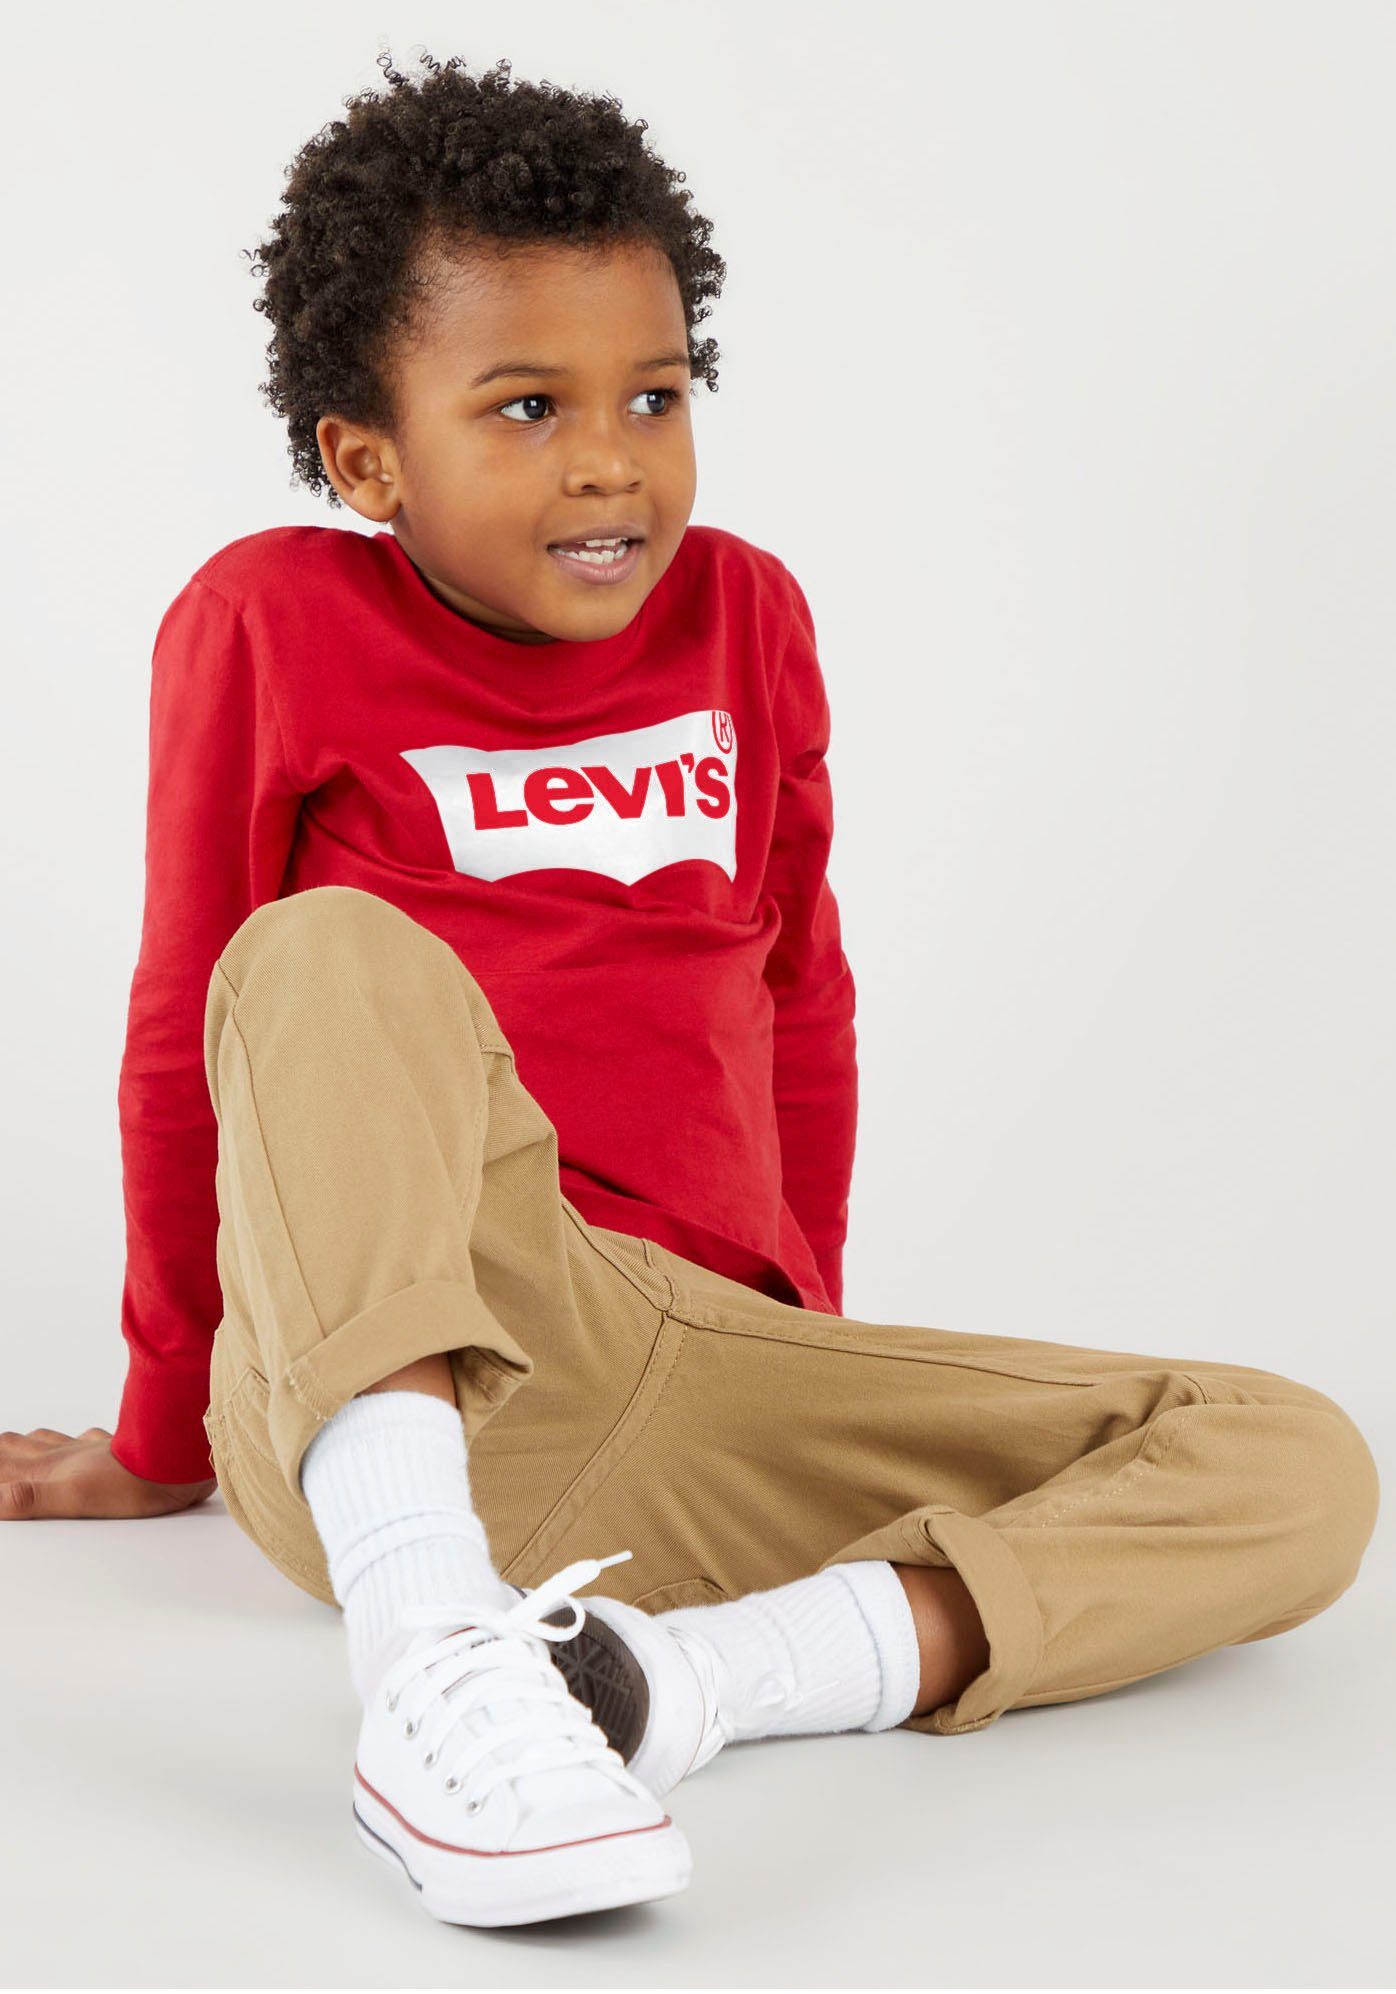 Levi's® Kids Langarmshirt L/S red for BOYS TEE BATWING